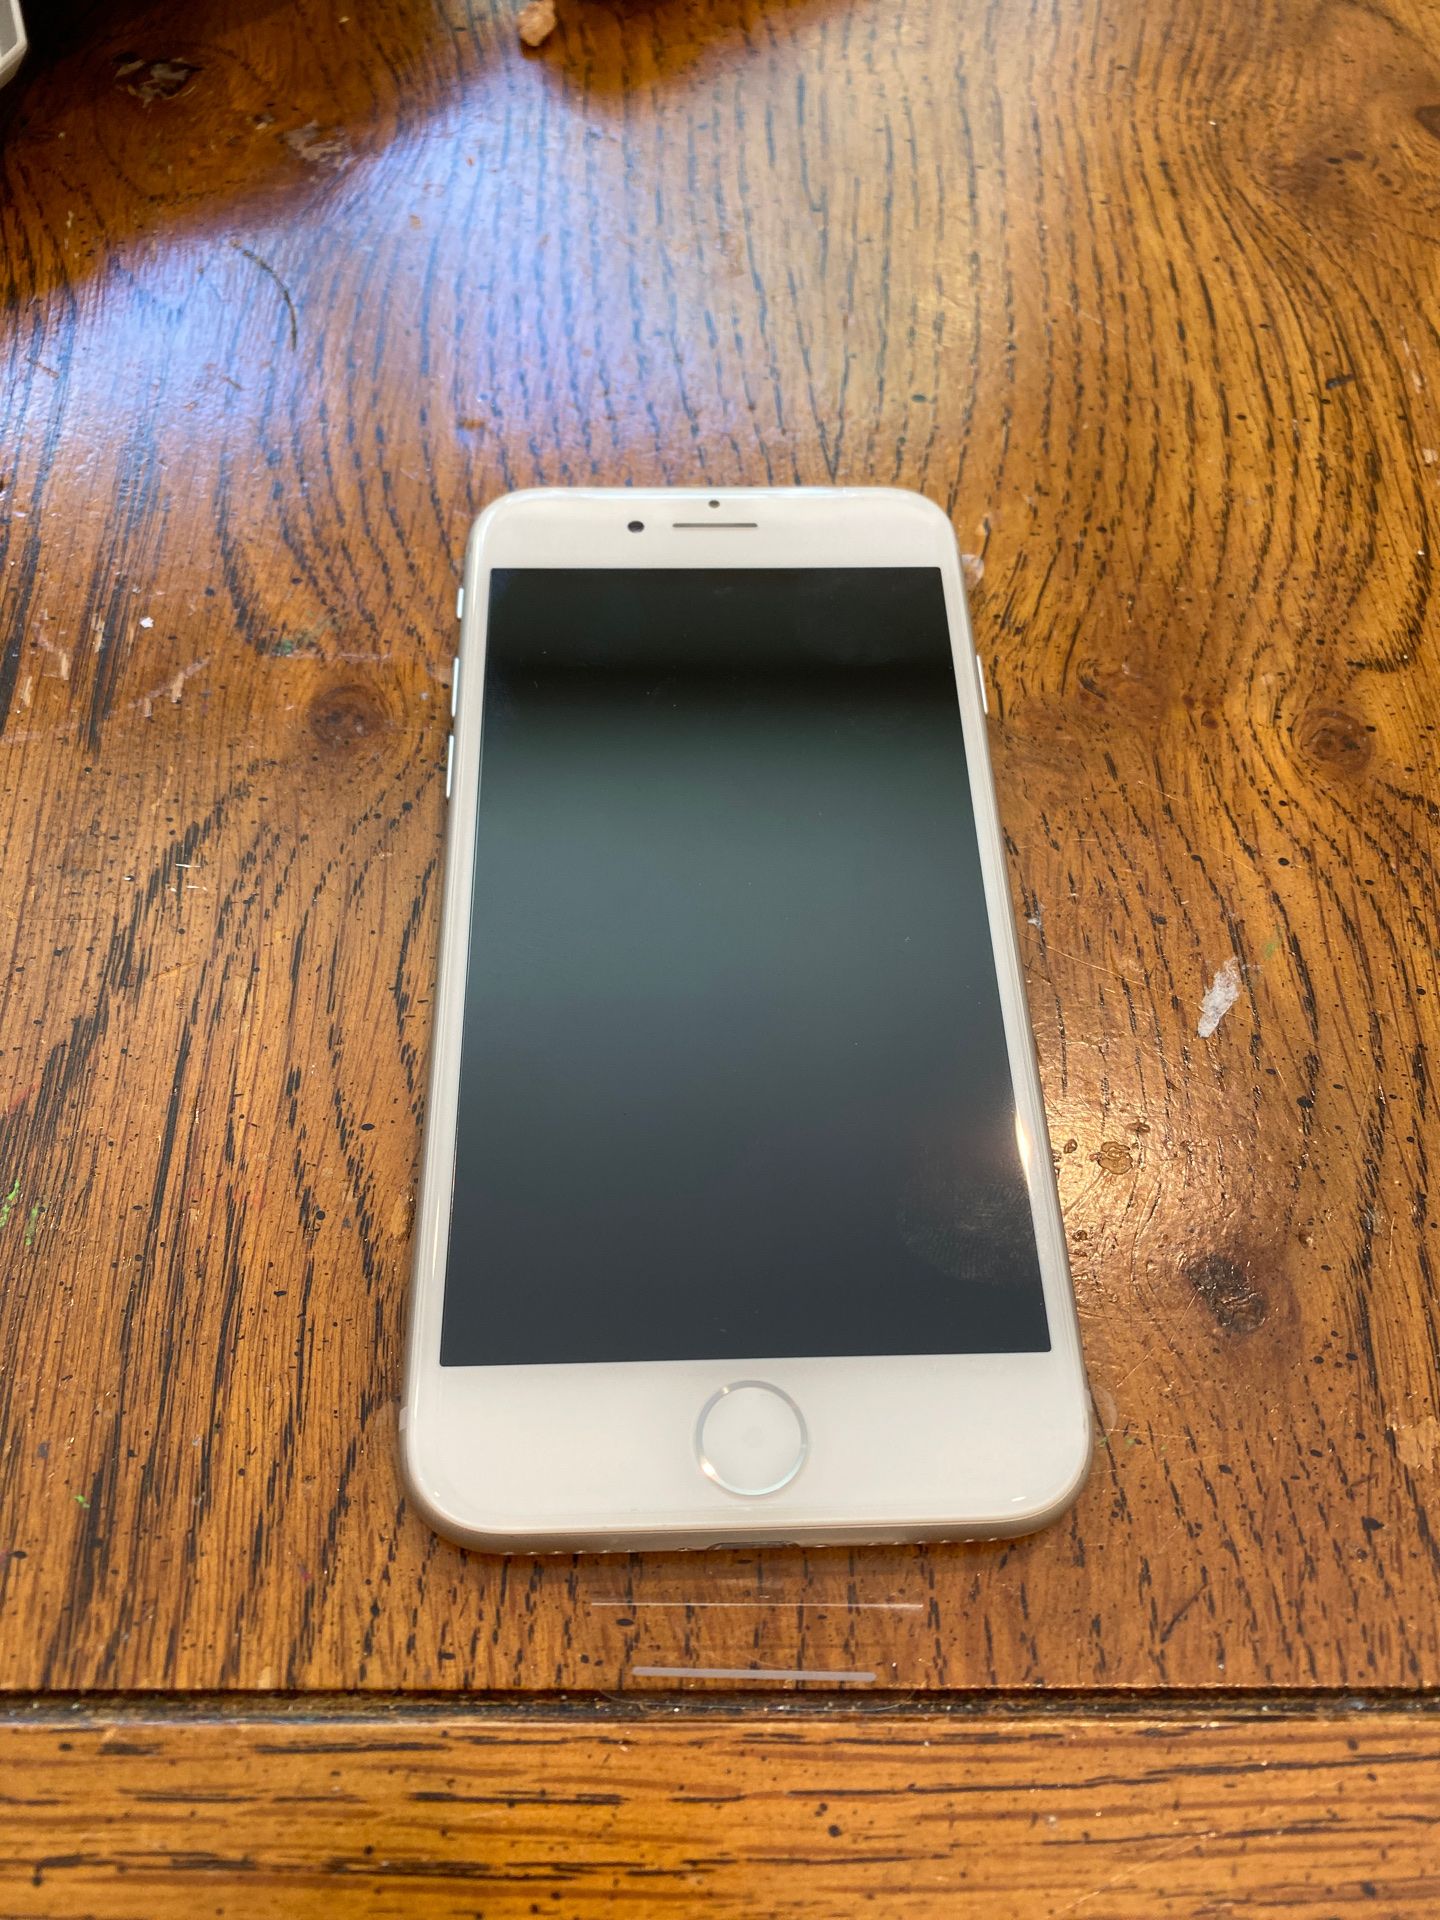 T mobile iPhone 8 64 gb